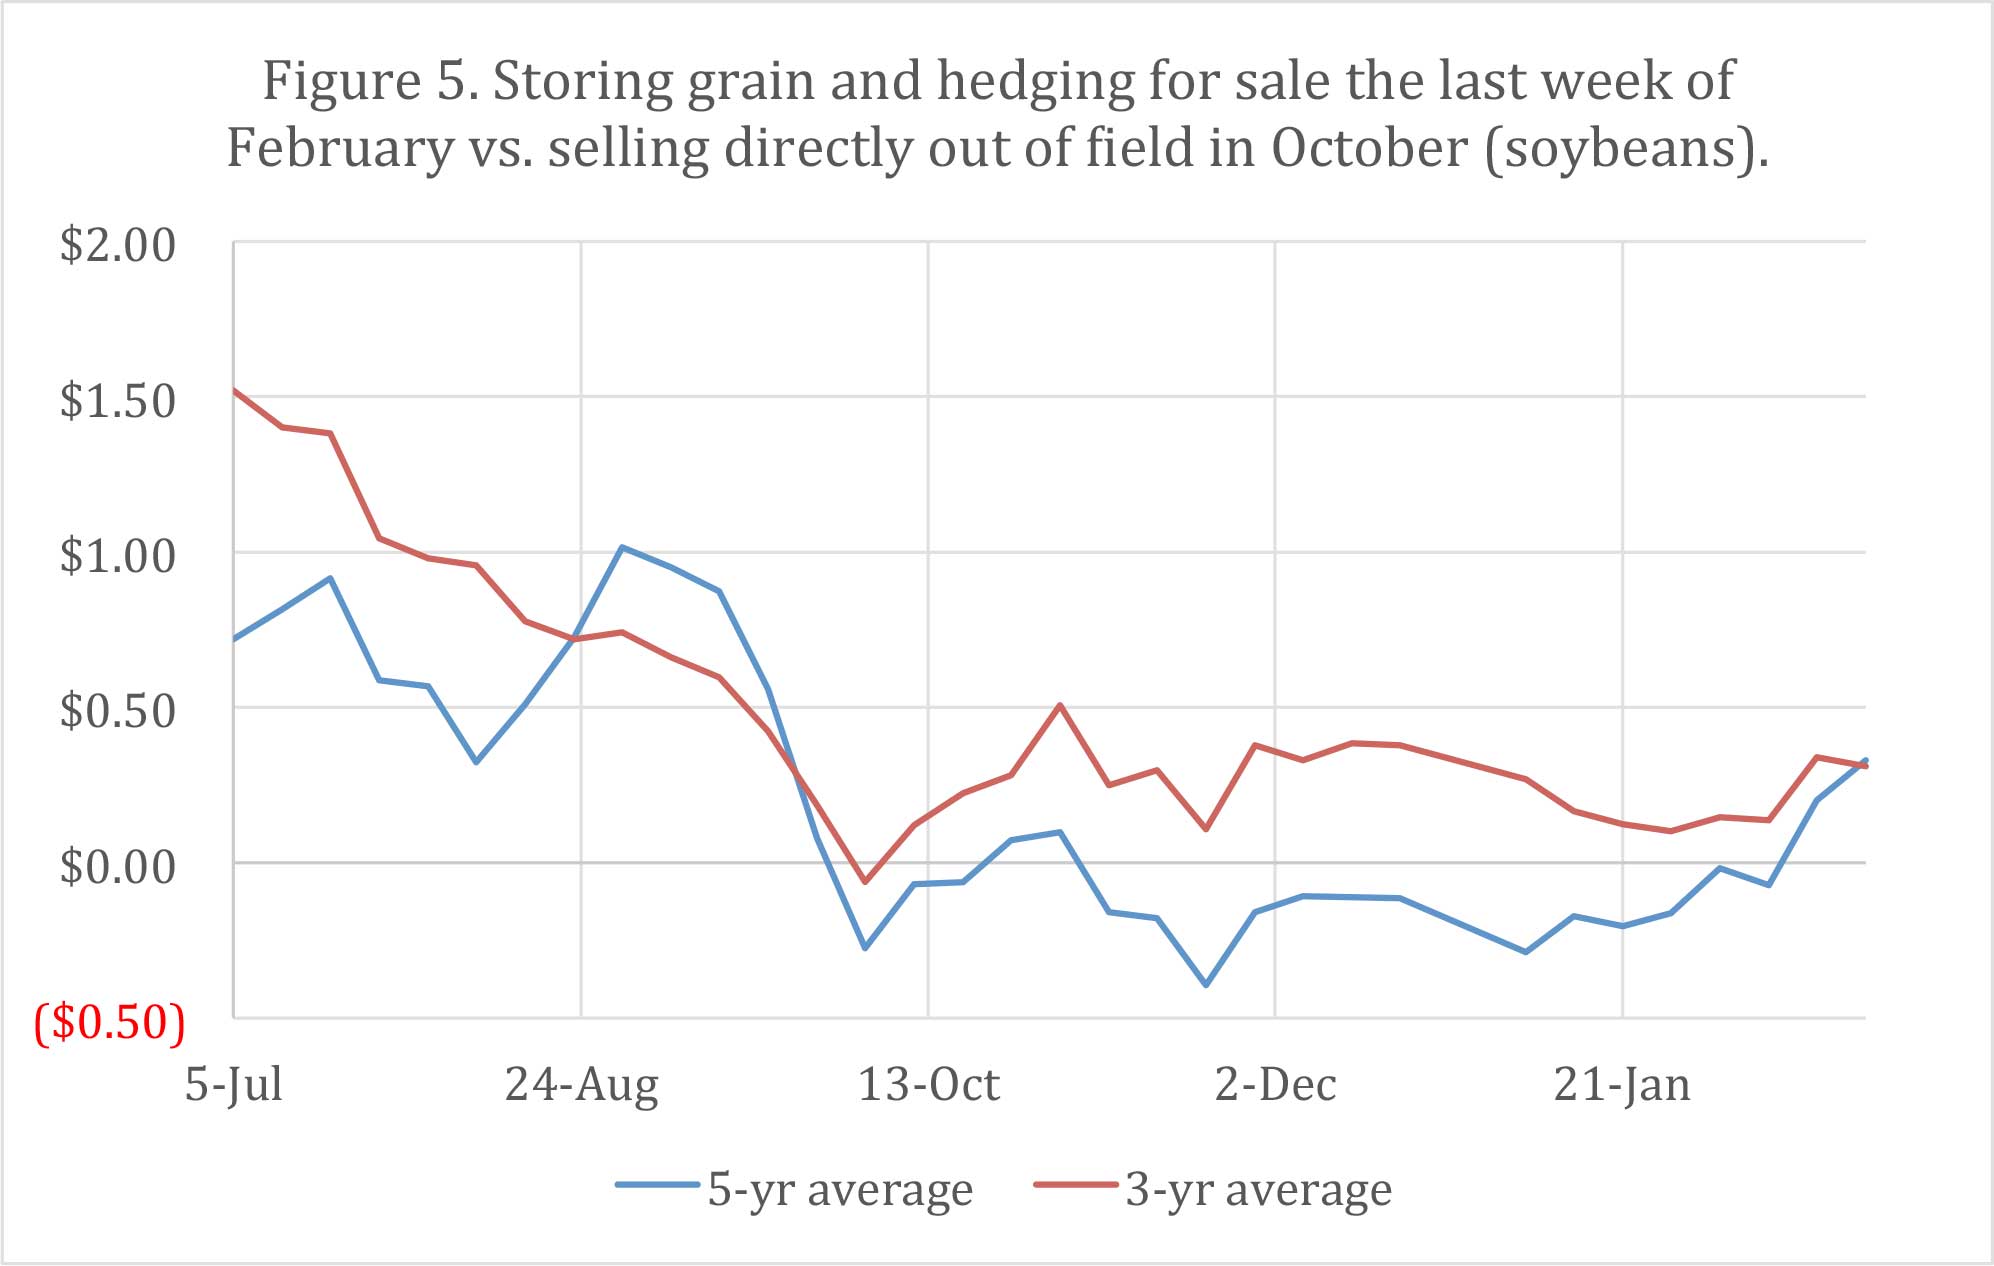 Figure 5. Storing grain and hedging for sale the last week of February vs. selling directly out of field in October (soybeans). 